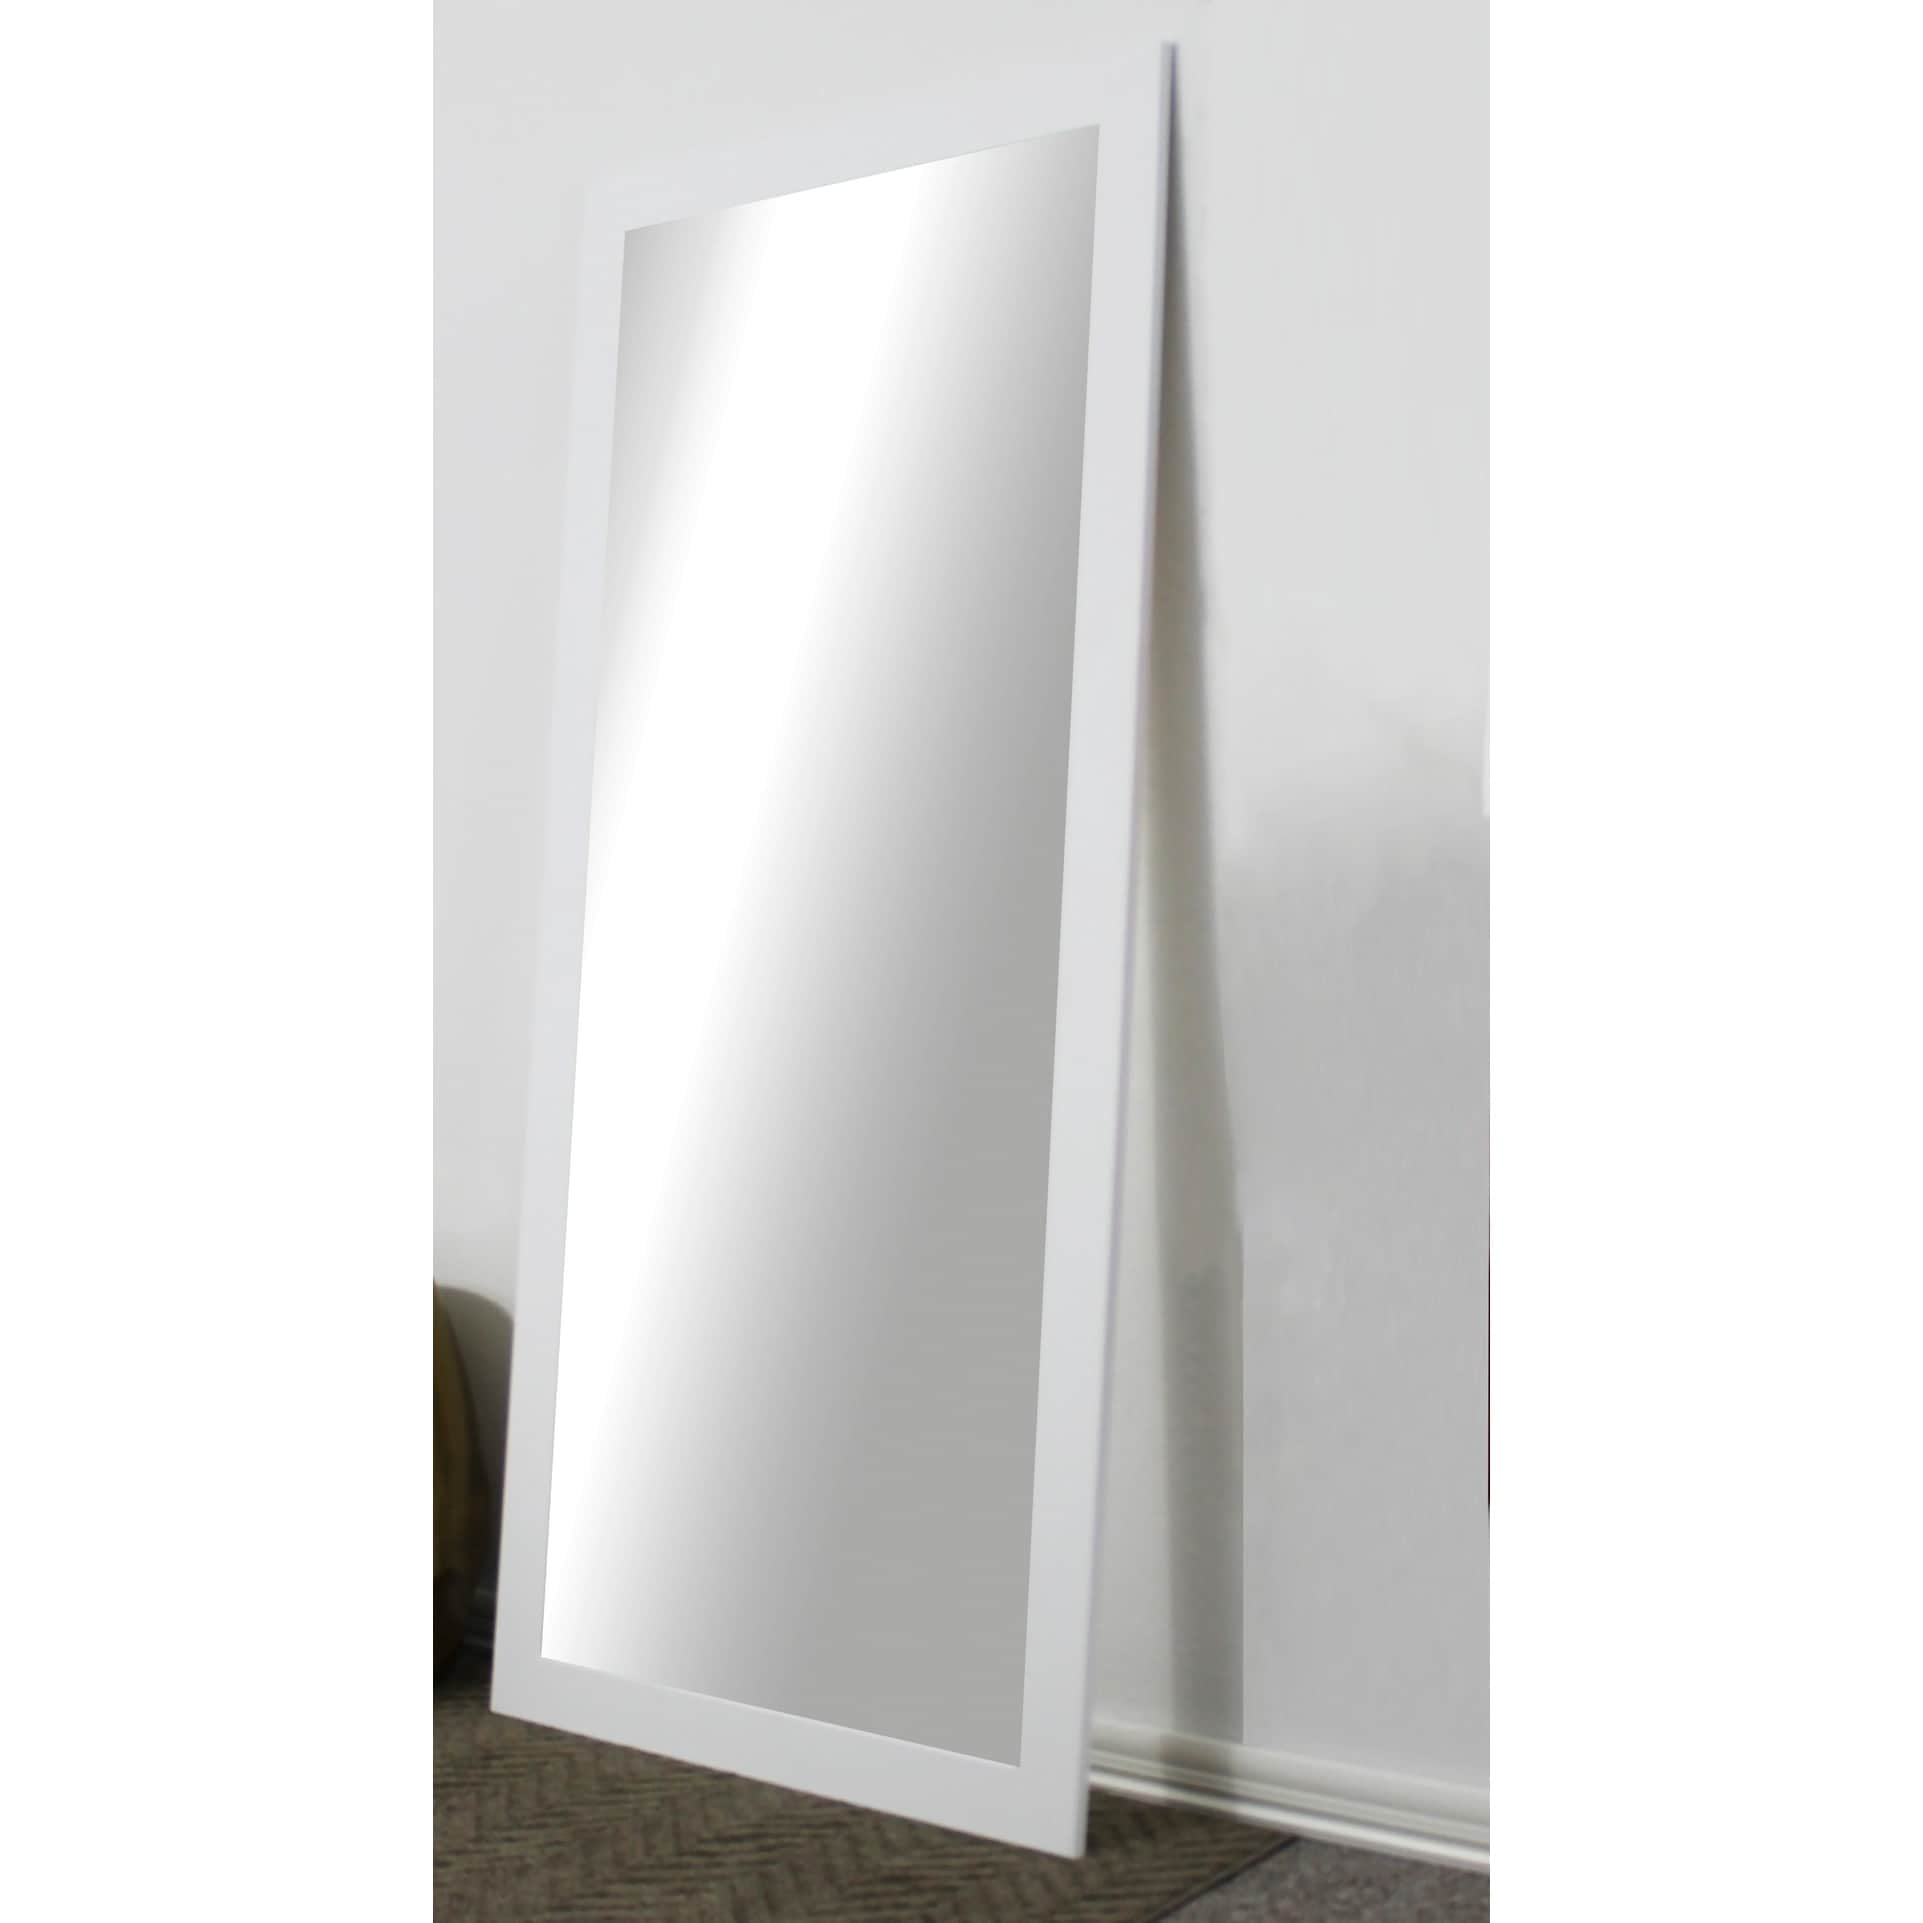 White Floor Length Mirror: Reflect Your Style